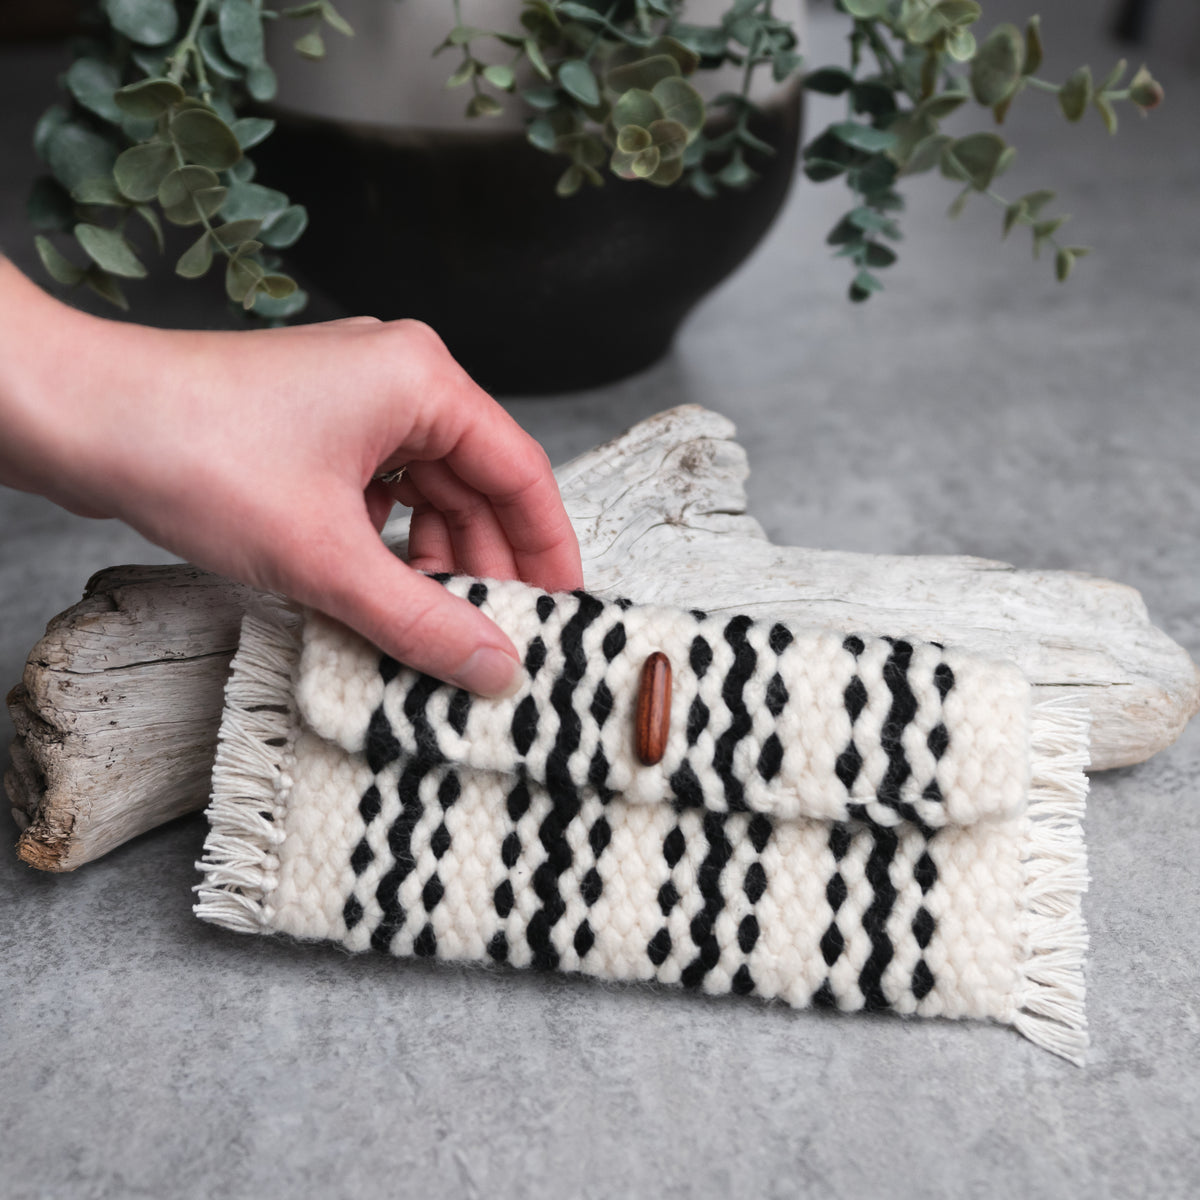 A picture of a black and white striped woven pouch.